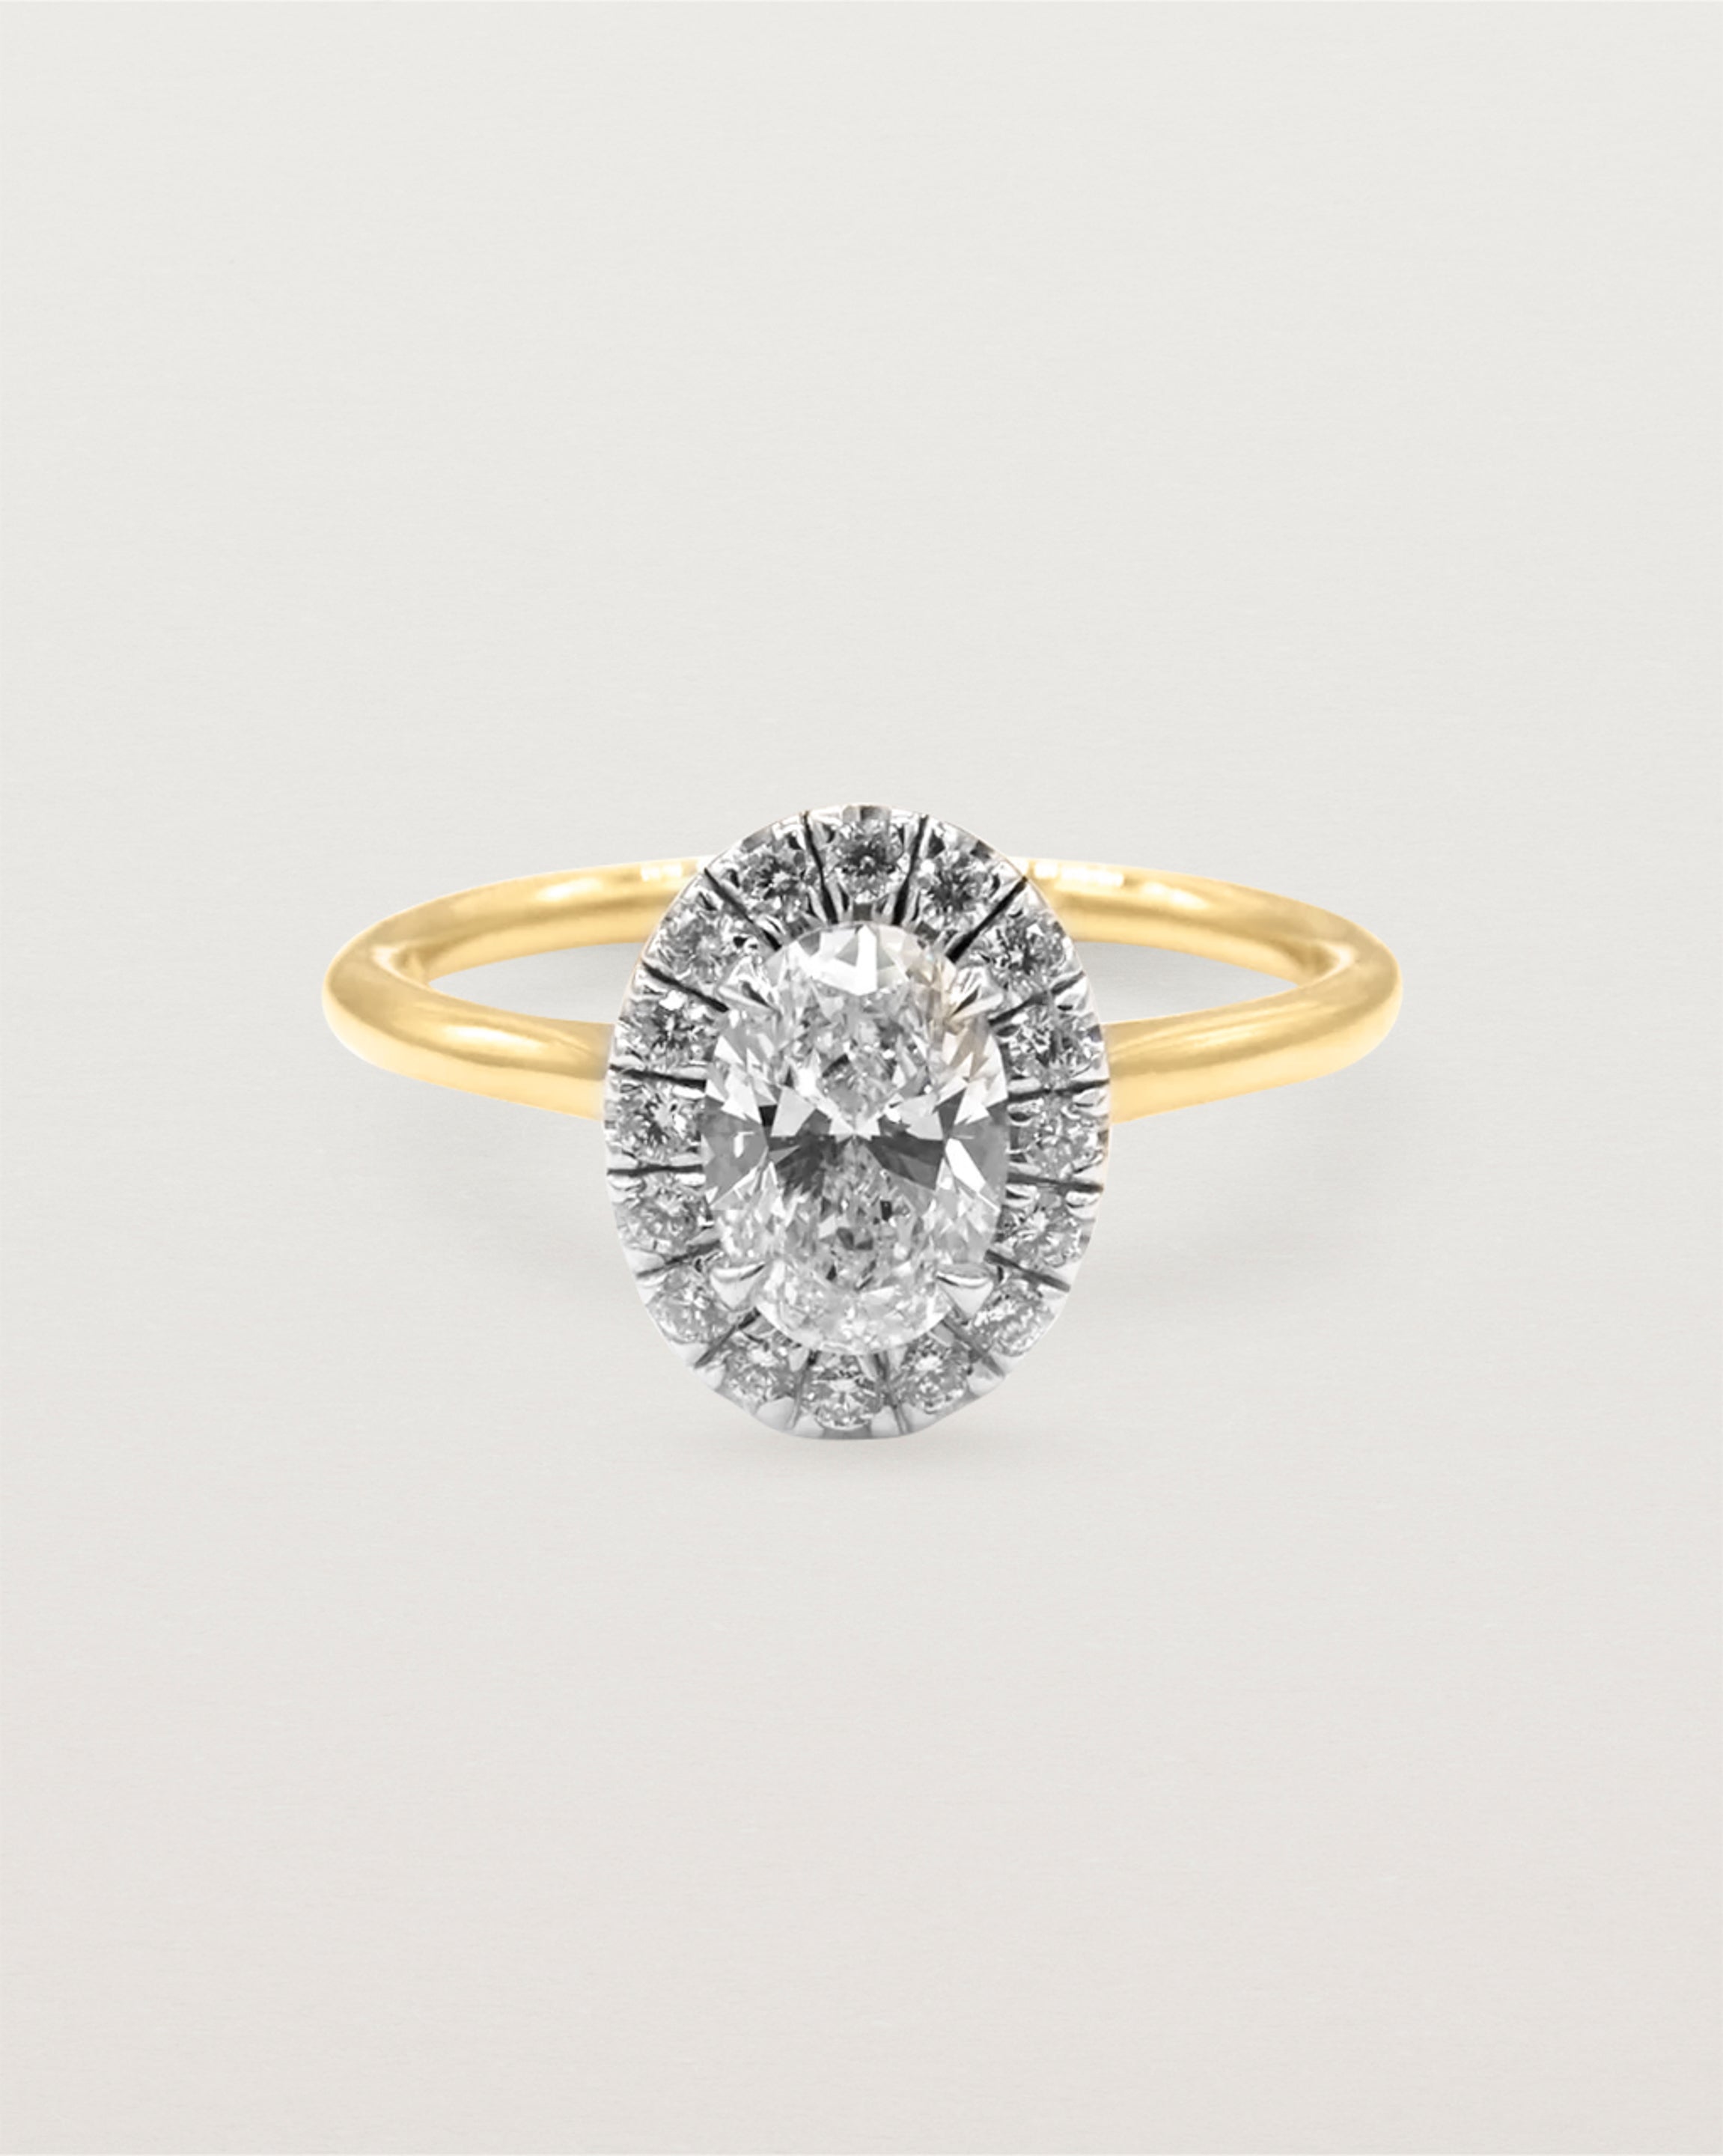 A 0.70ct oval cut diamond is adorned with a sparkling white diamond halo crafted in both yellow gold and white gold 